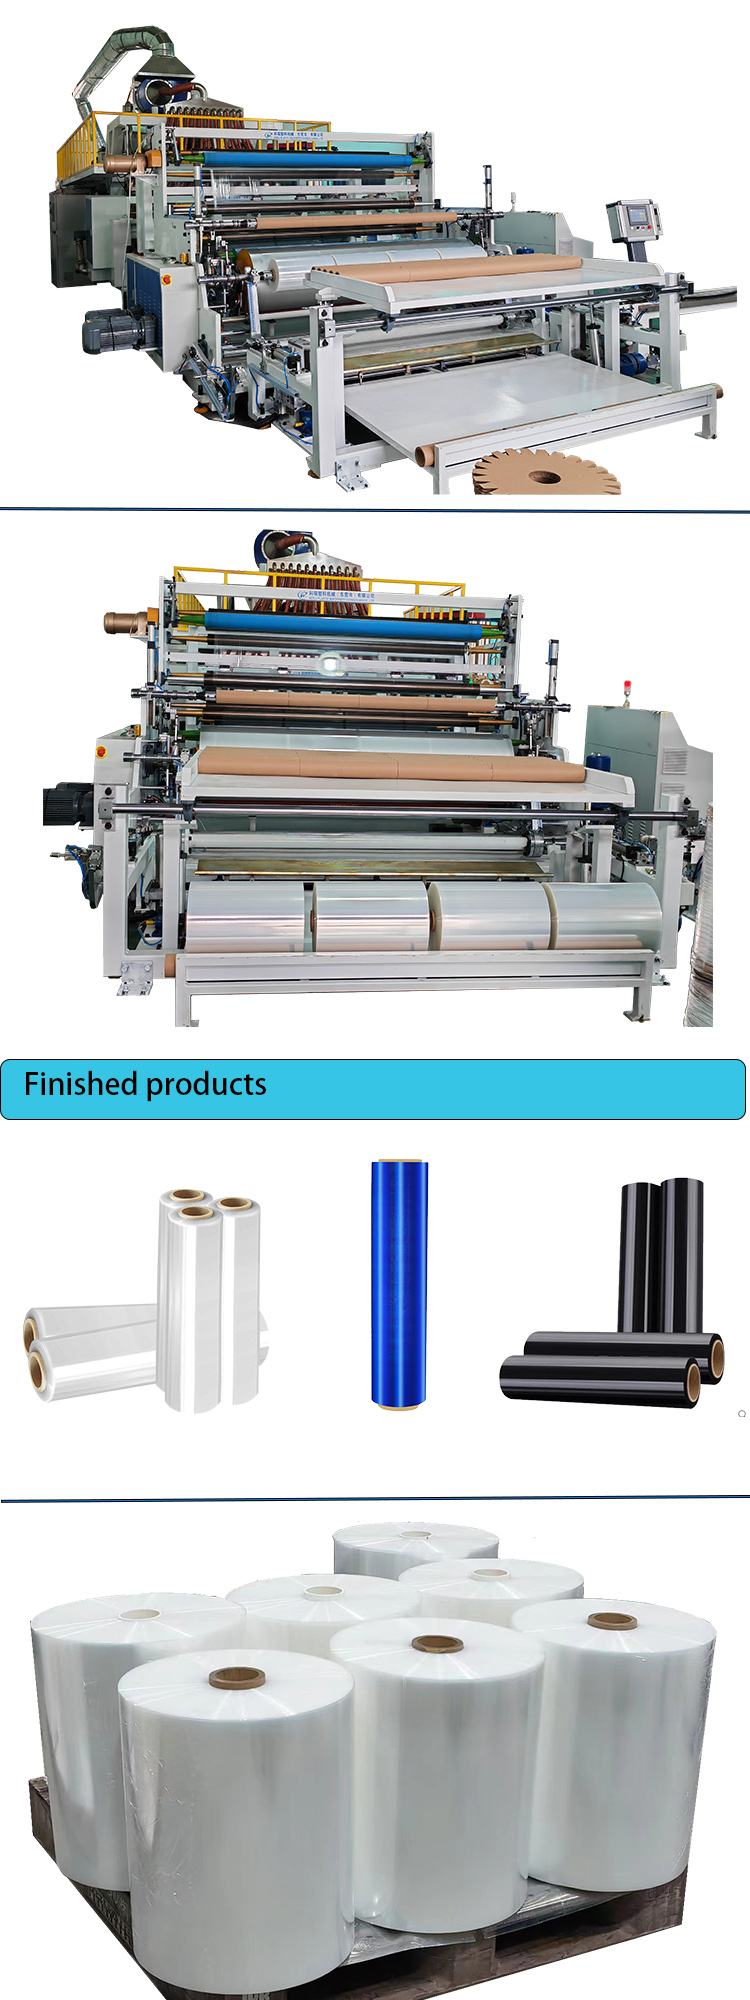 KeRui machinery 2meter pe plastic stretch film making machine supplier with fully automatic loading unloading paper core